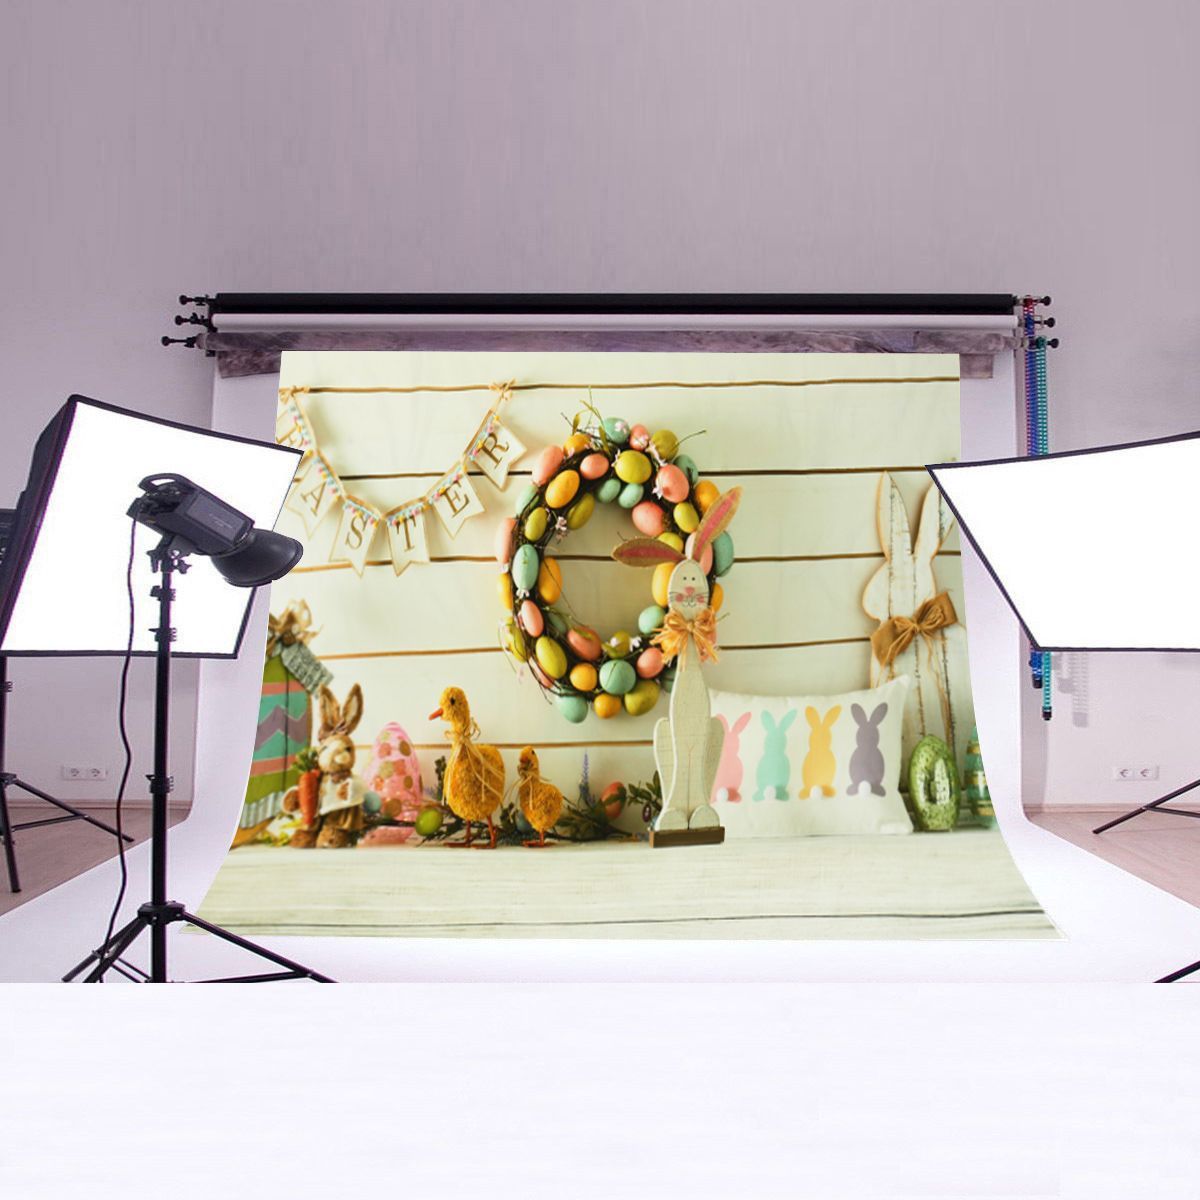 7x5ft5x3ft-Easter-Duck-Theme-Thin-Vinyl-Photography-Backdrop-Background-Studio-Photo-Prop-1310115